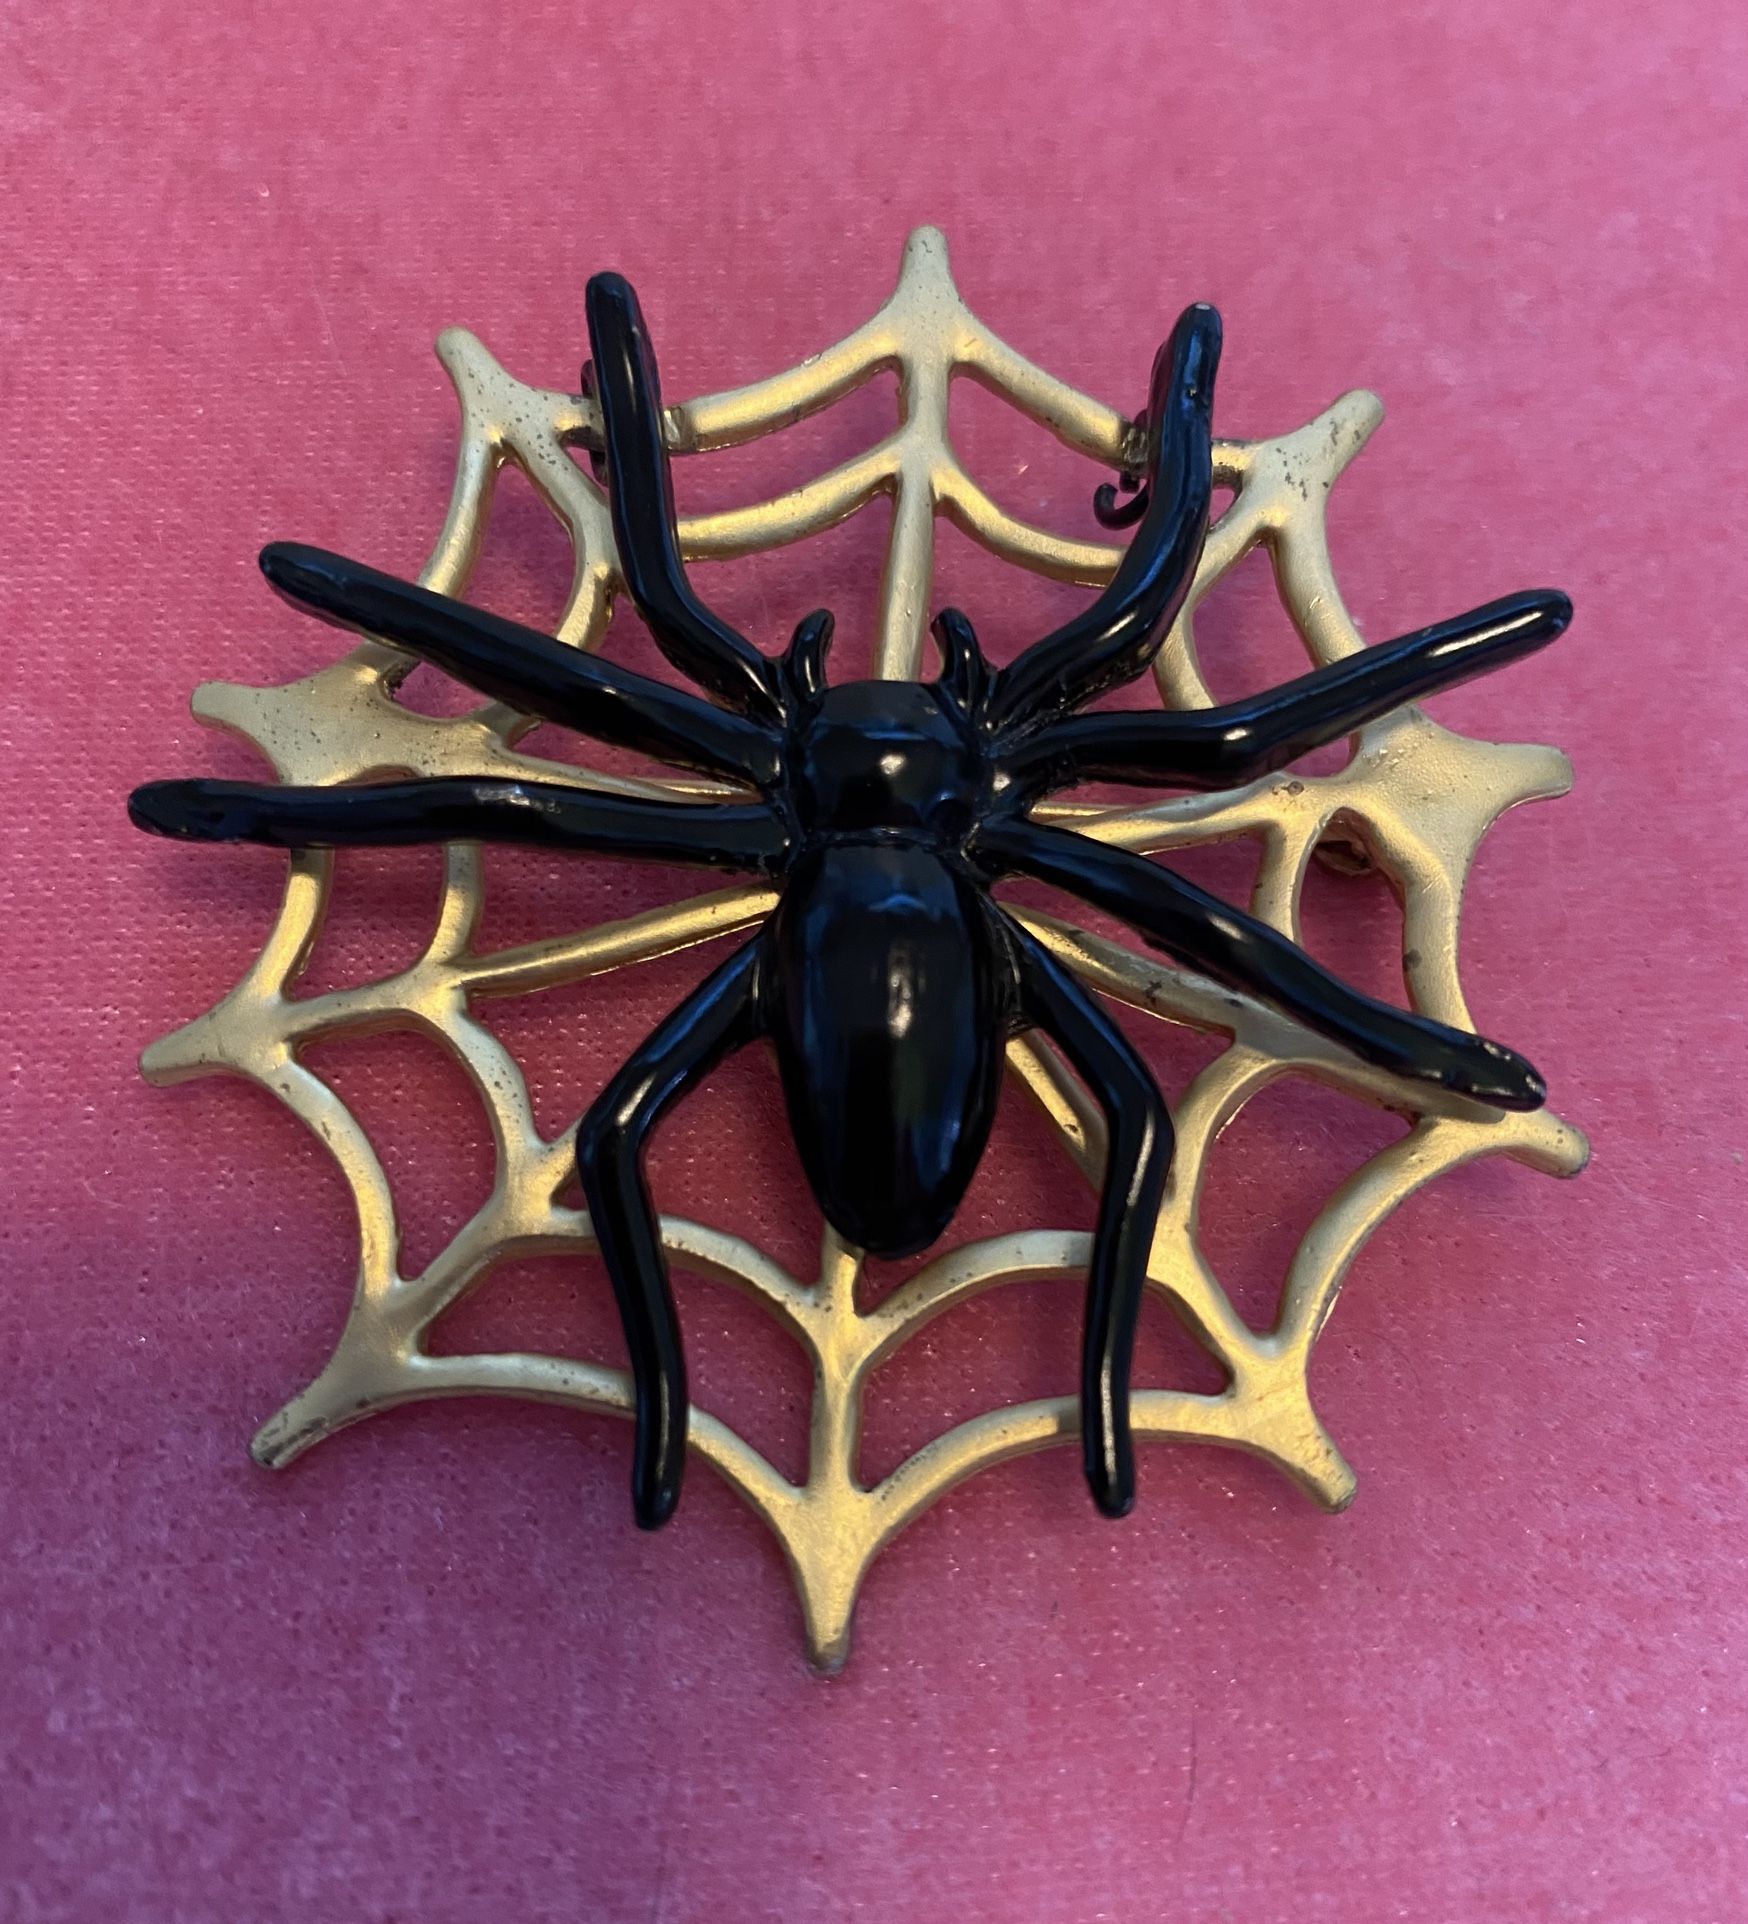 Gold Spider Web Brooch with Hinged Black Spider 2.25"-Great for Halloween!